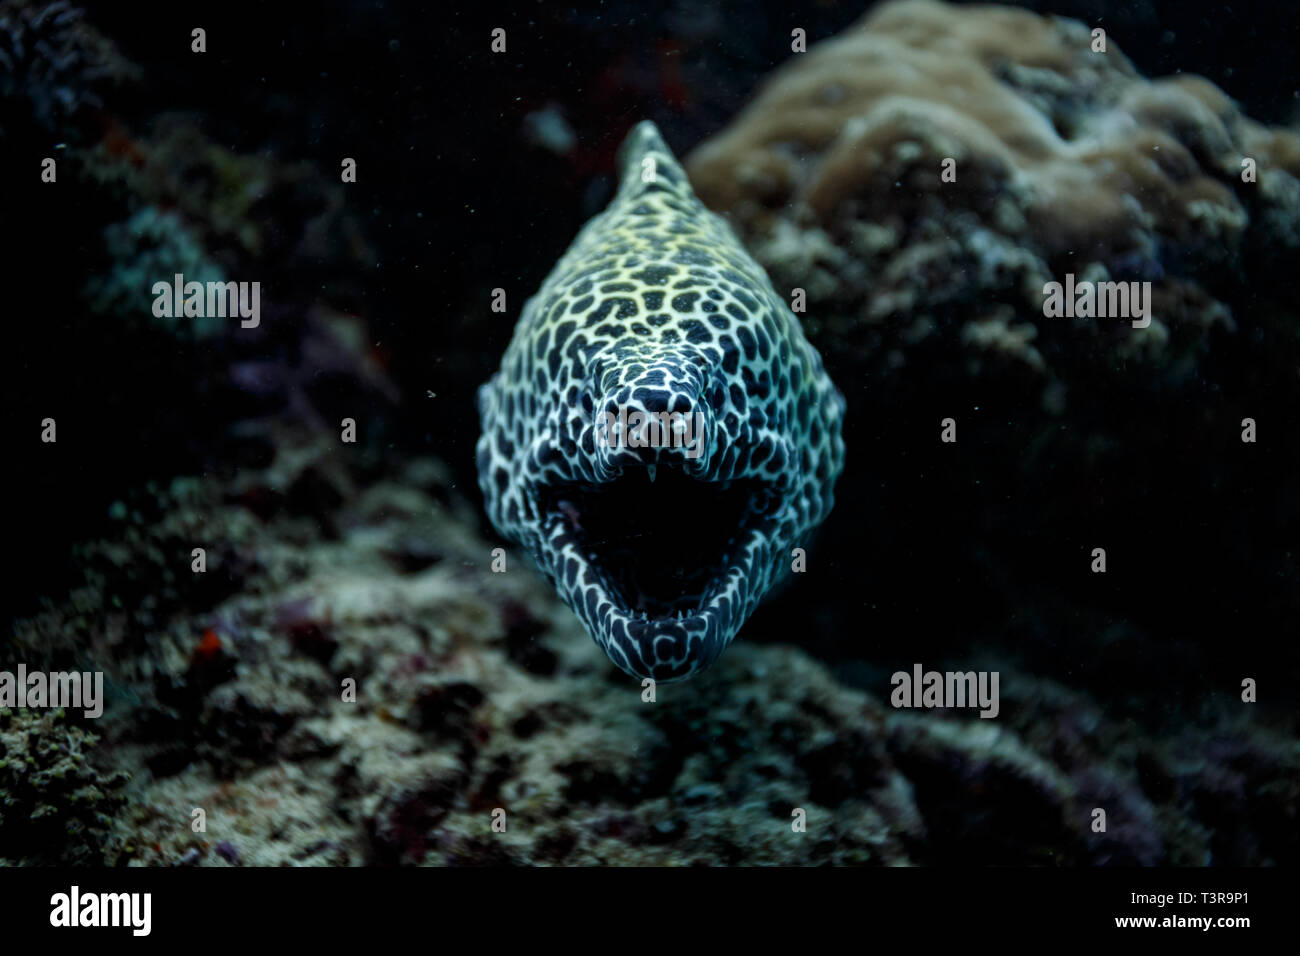 Closeup of yellow spotted moray eel face with mouth open Stock Photo